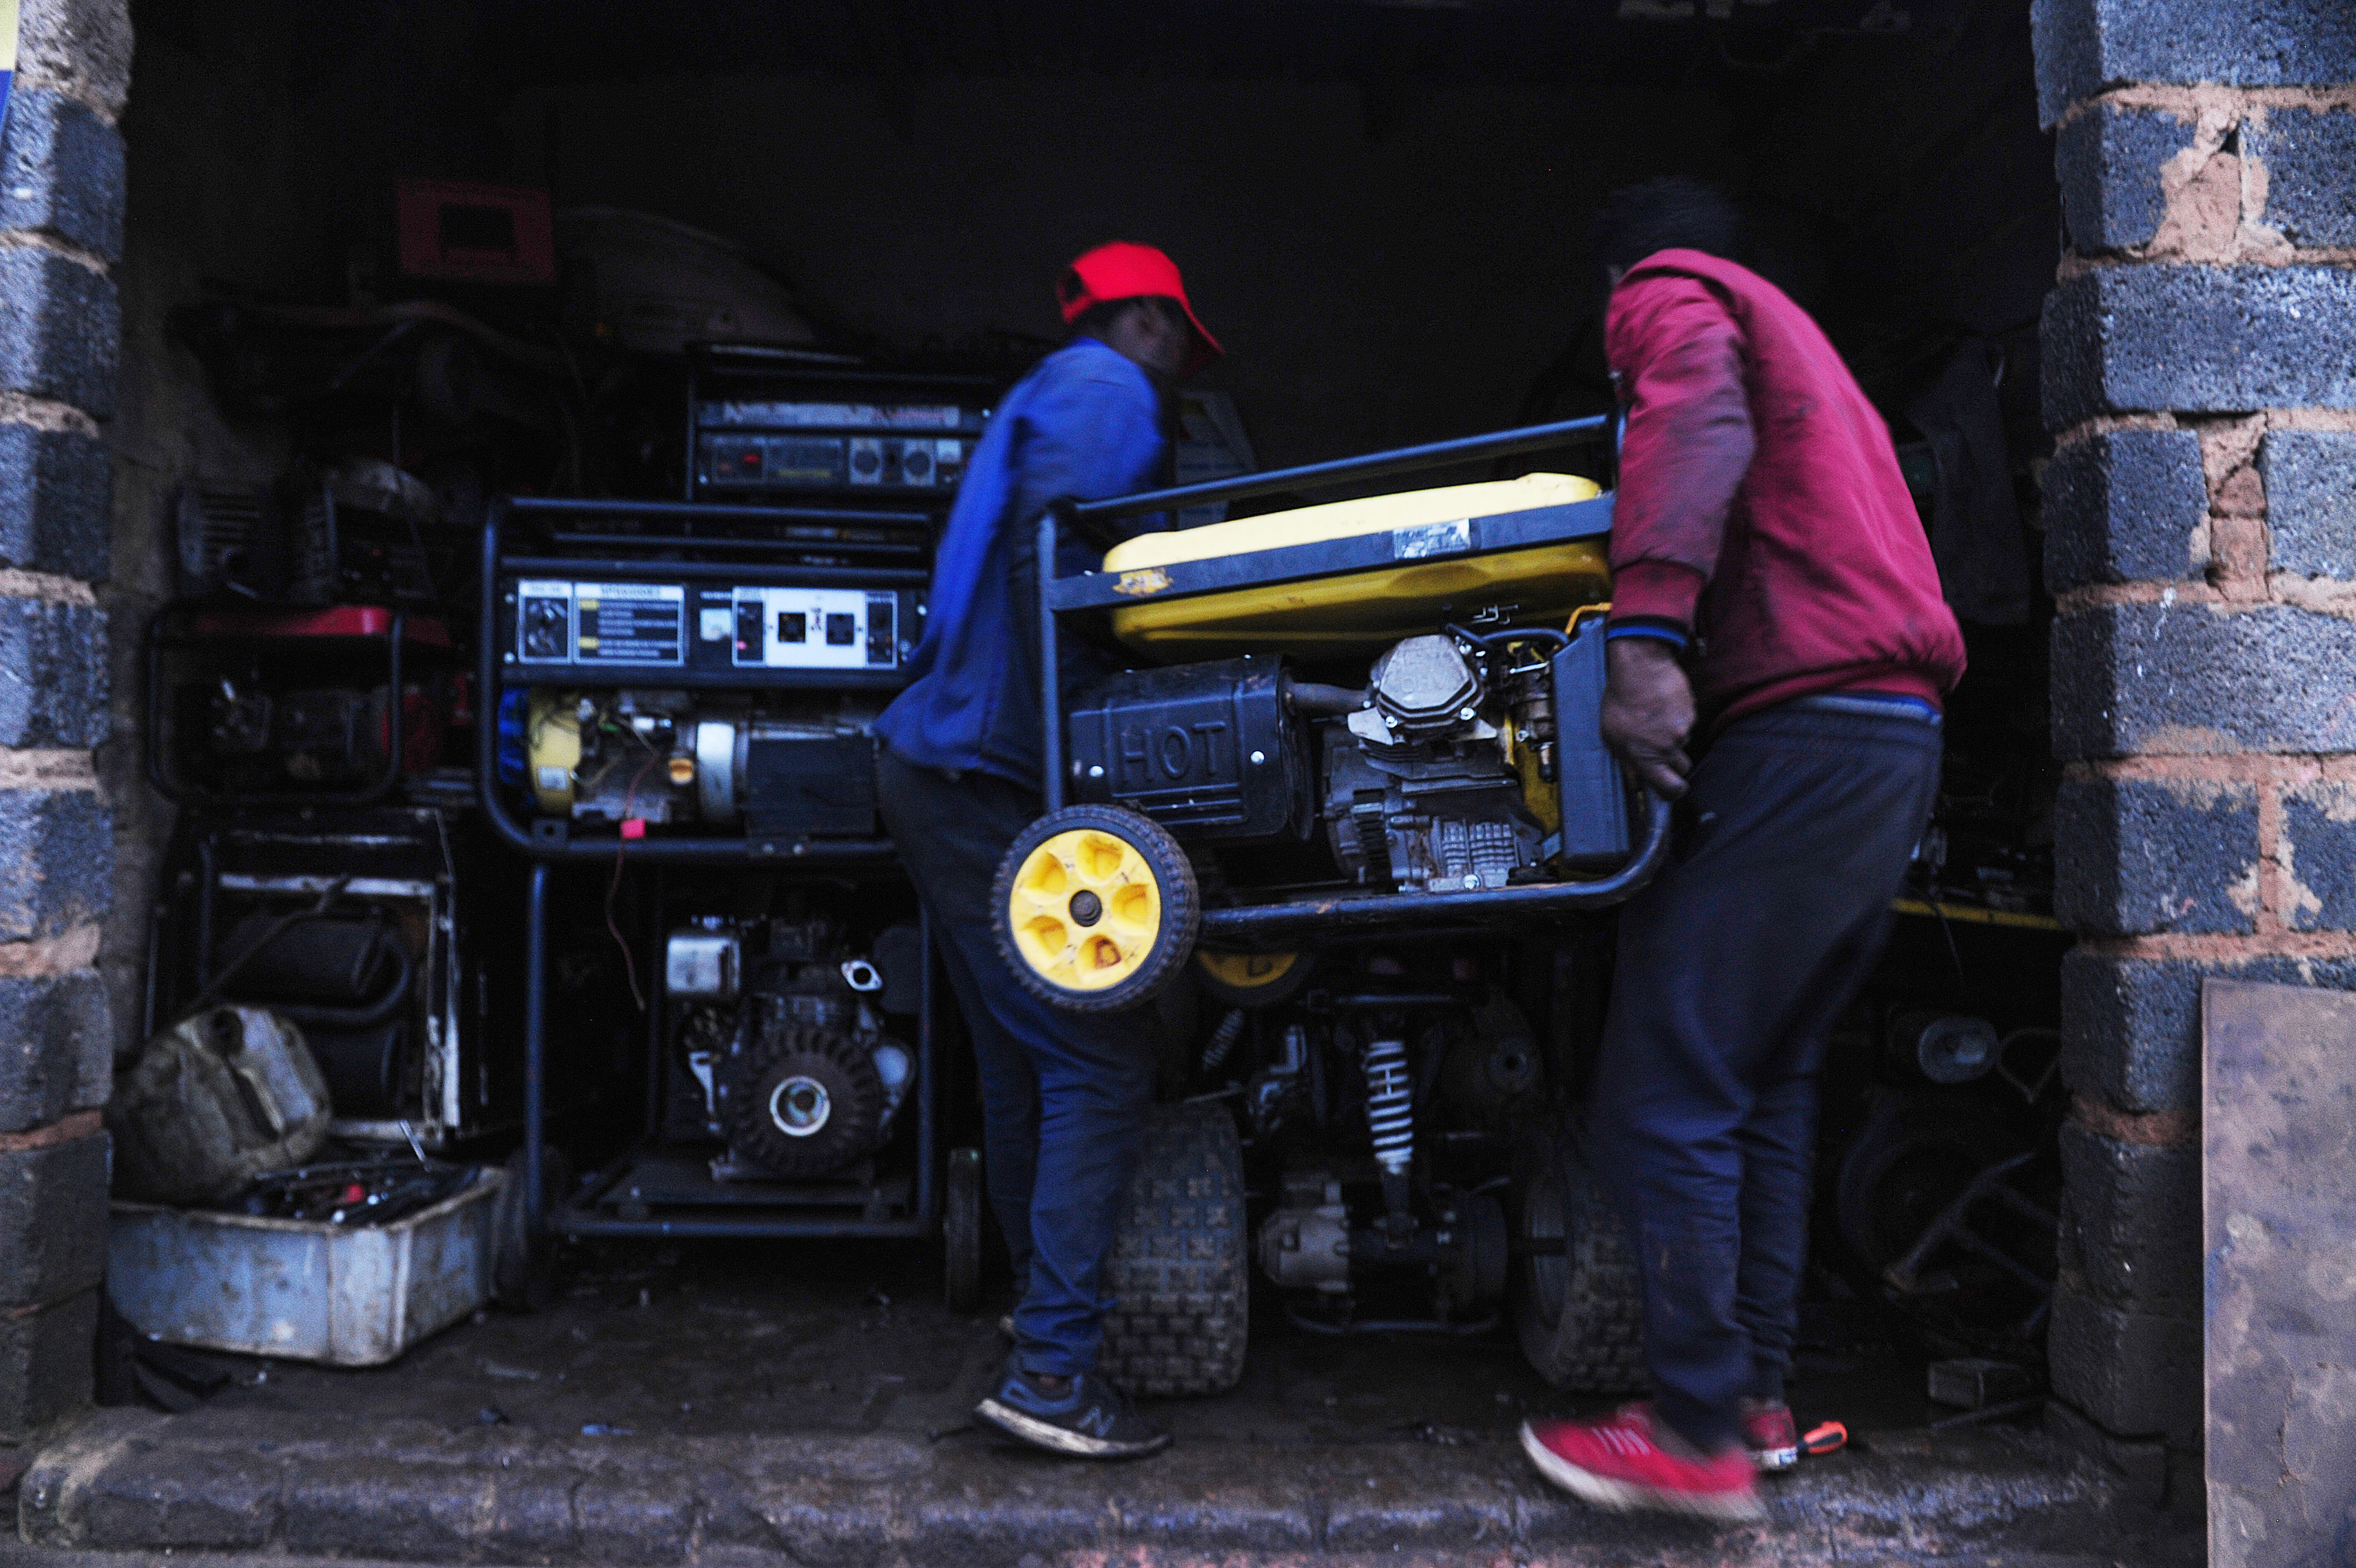 Employees at a generator repair business in Soweto.